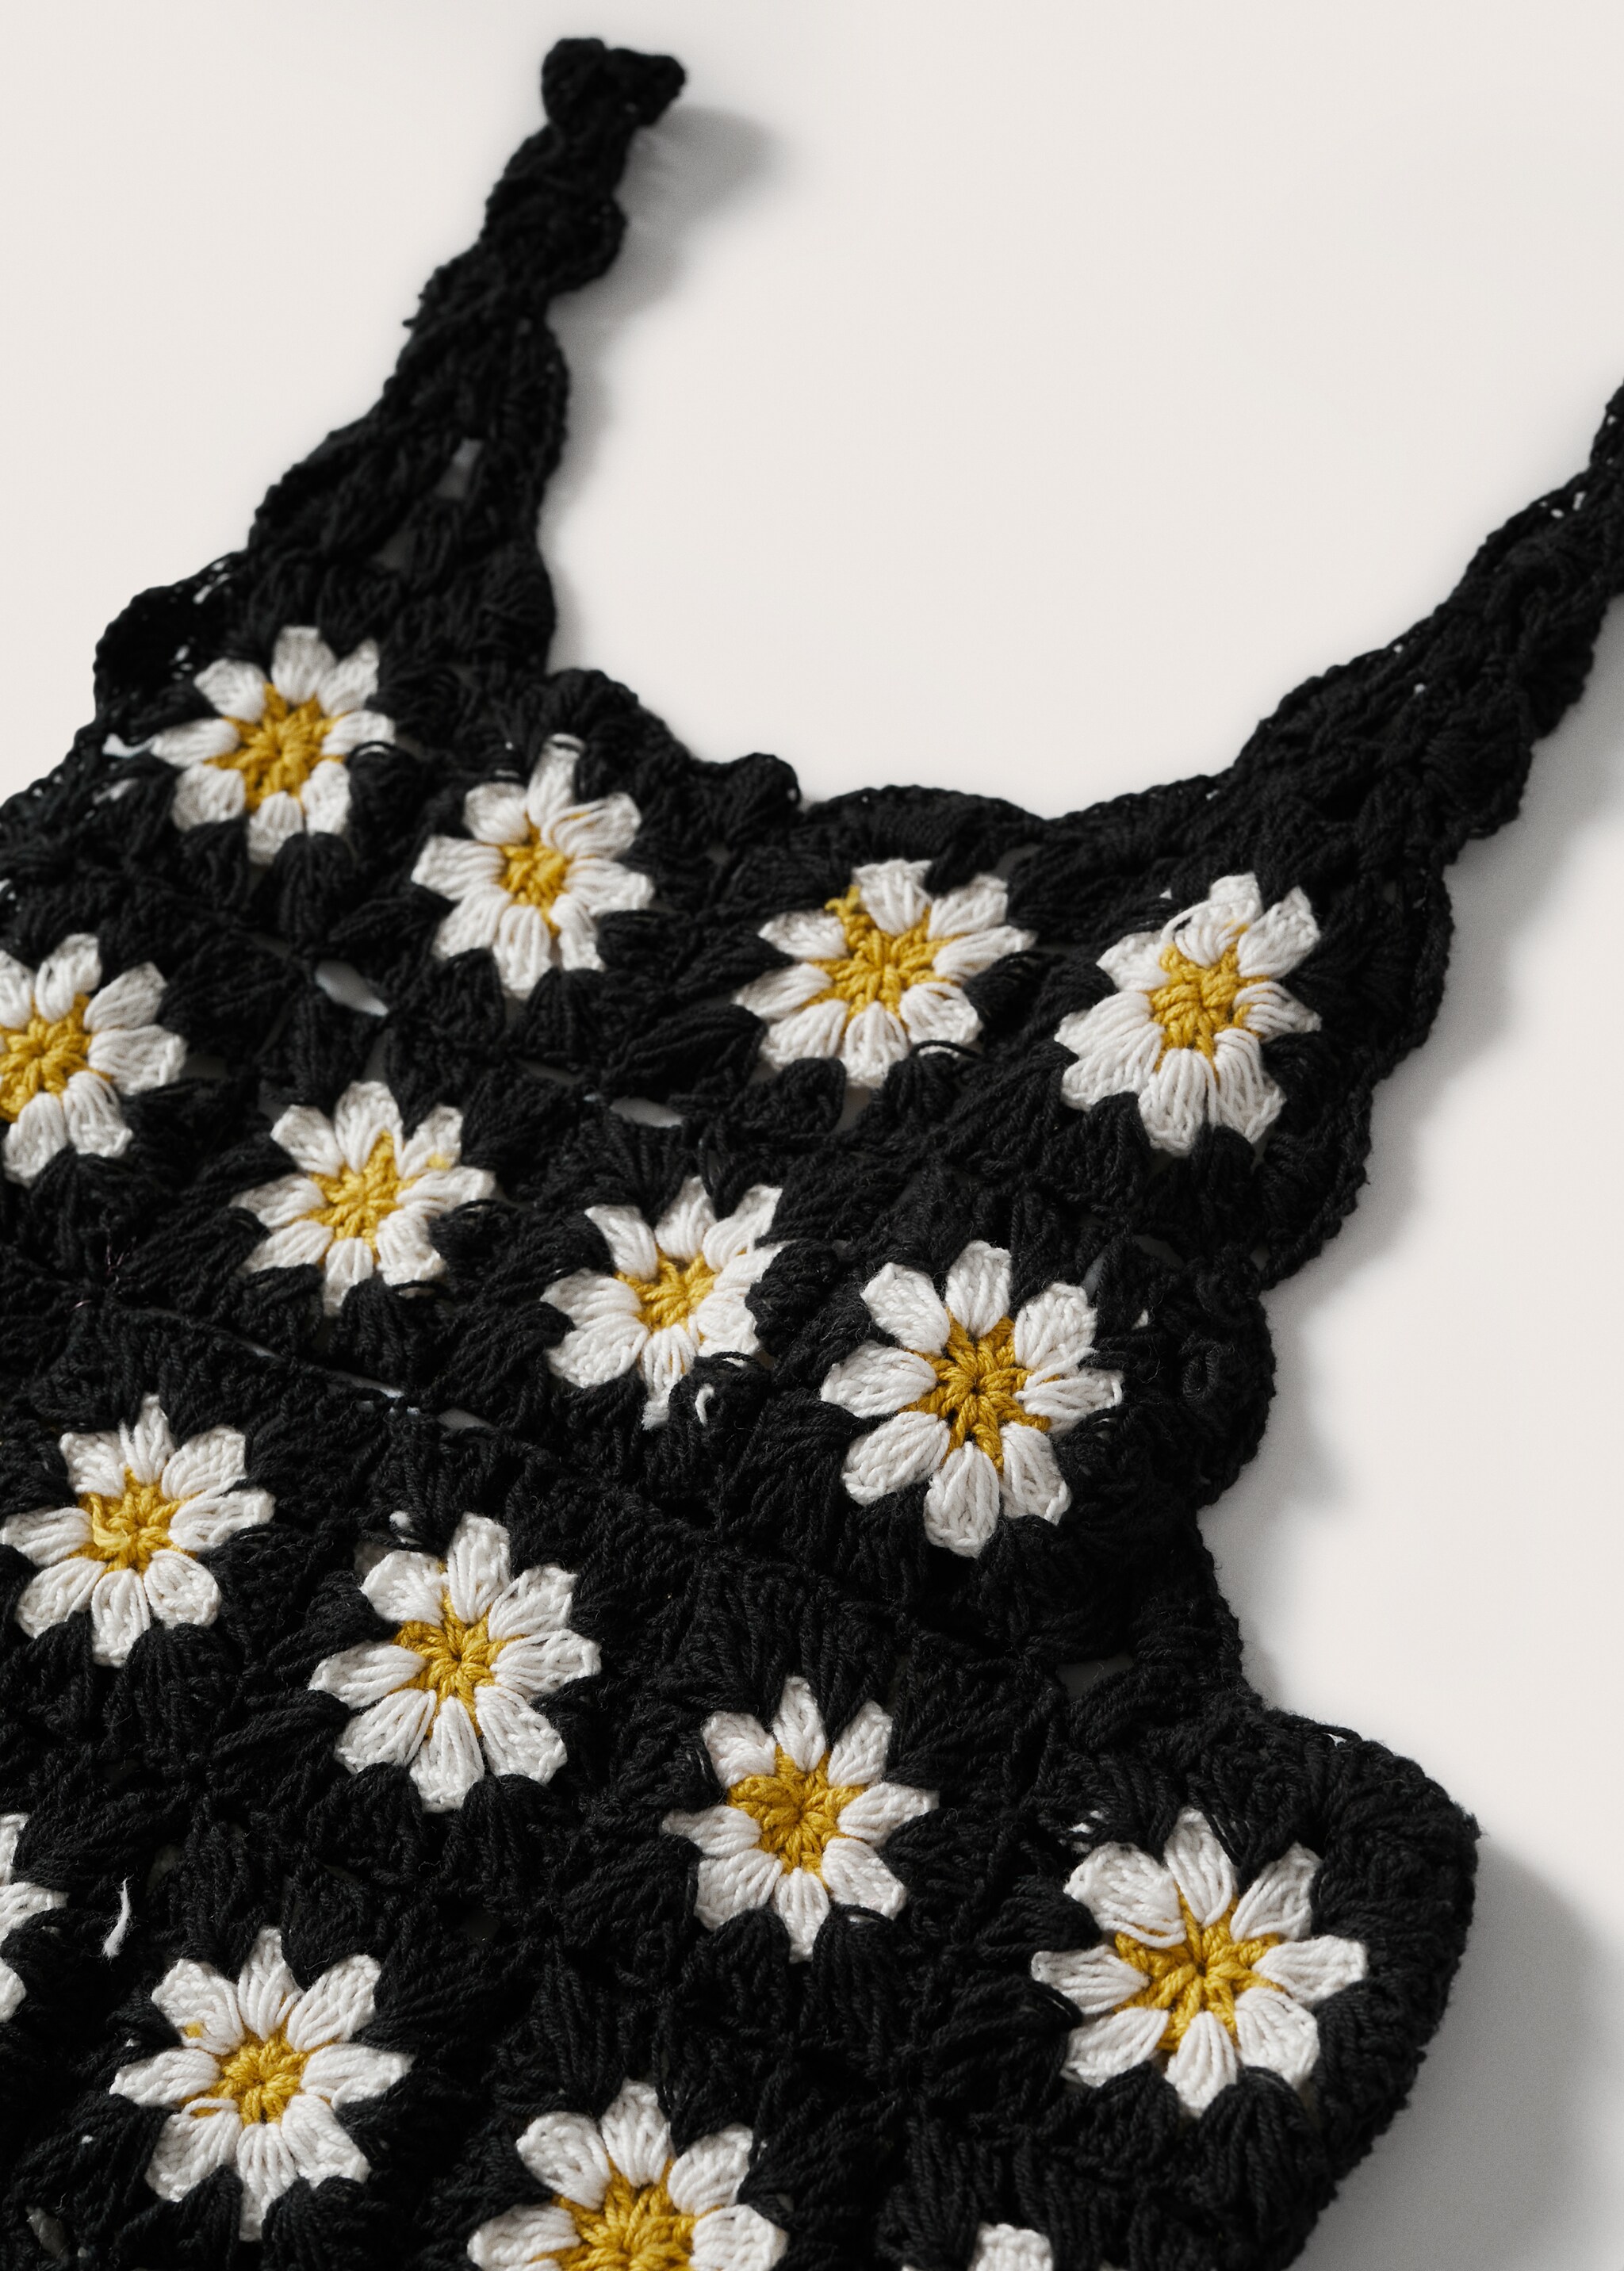 Daisy crochet dress - Details of the article 8